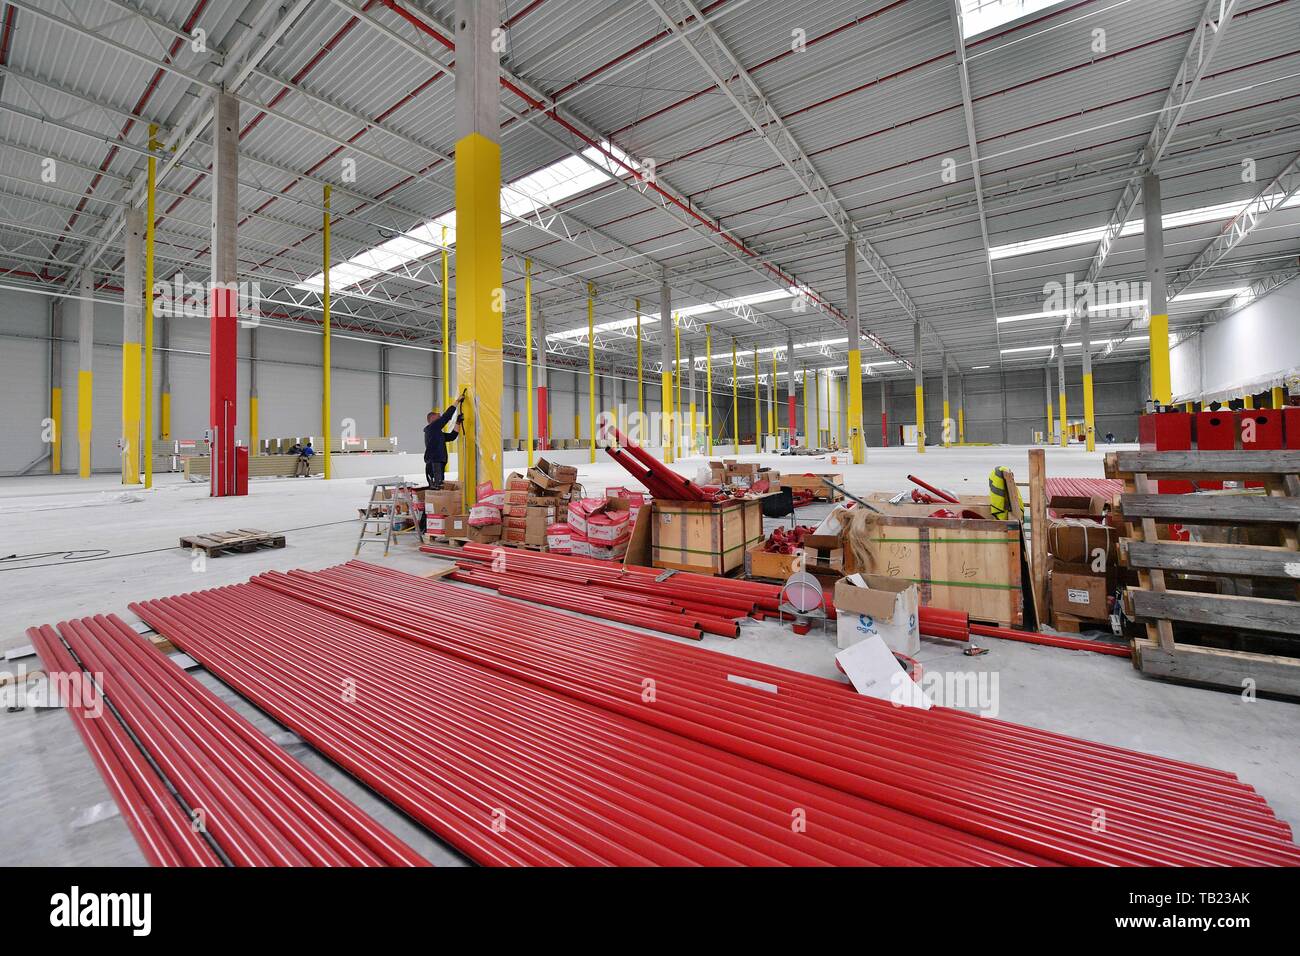 Erfurt, Germany. 29th May, 2019. Craftsmen work in the future Amazon  distribution centre, which is scheduled to start operations in autumn 2019.  This will add a distribution centre to the existing logistics